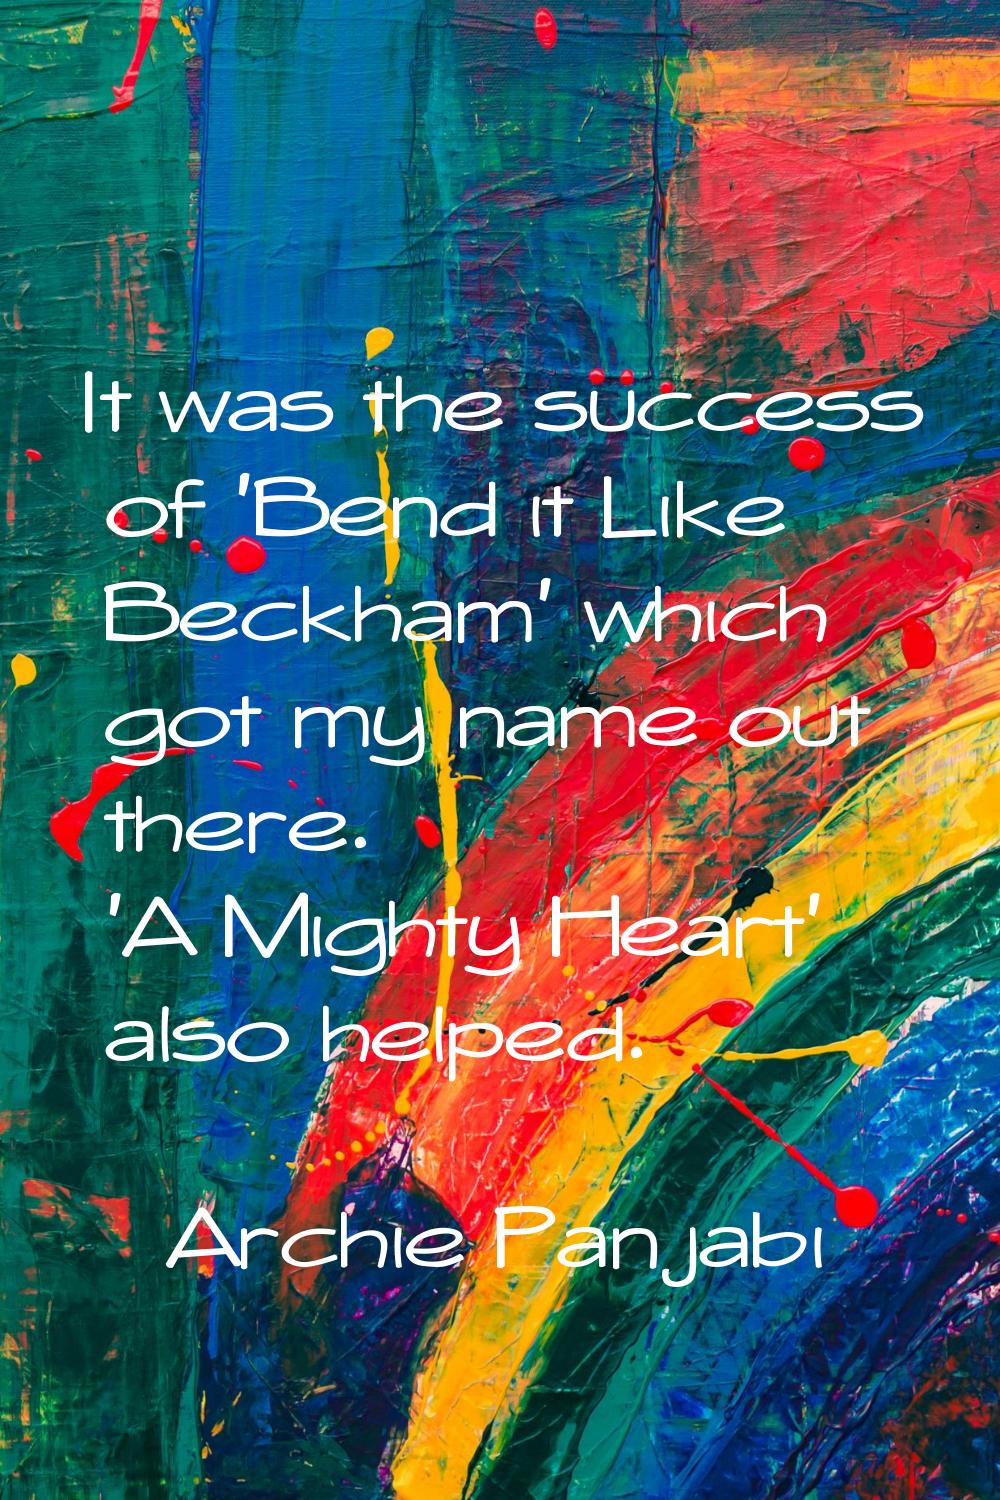 It was the success of 'Bend it Like Beckham' which got my name out there. 'A Mighty Heart' also hel